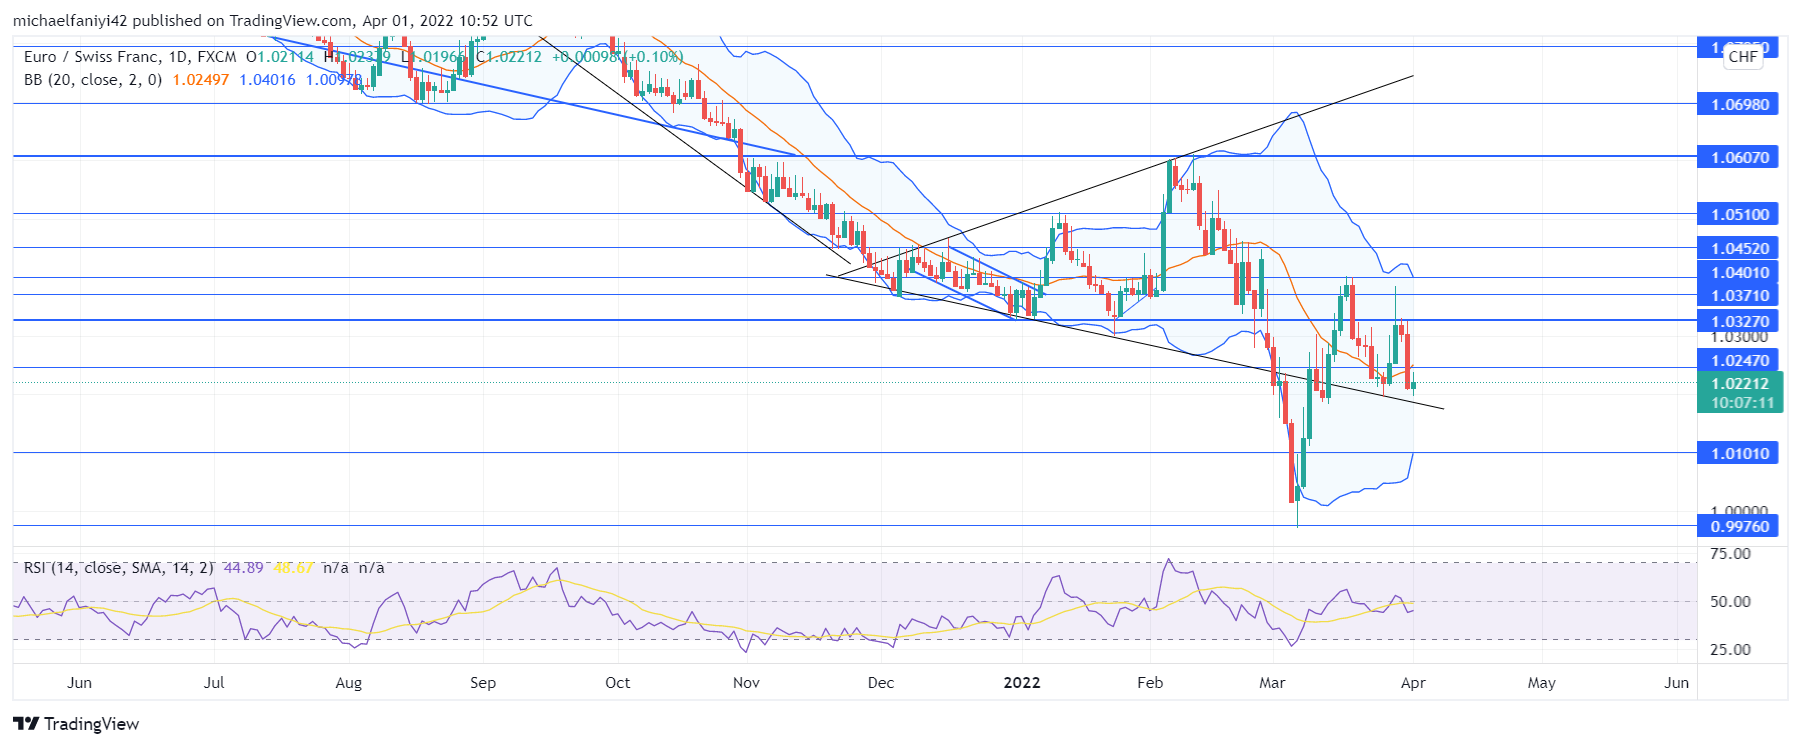 EURCHF Remains Bearish Despite Rebounding From a Support Level